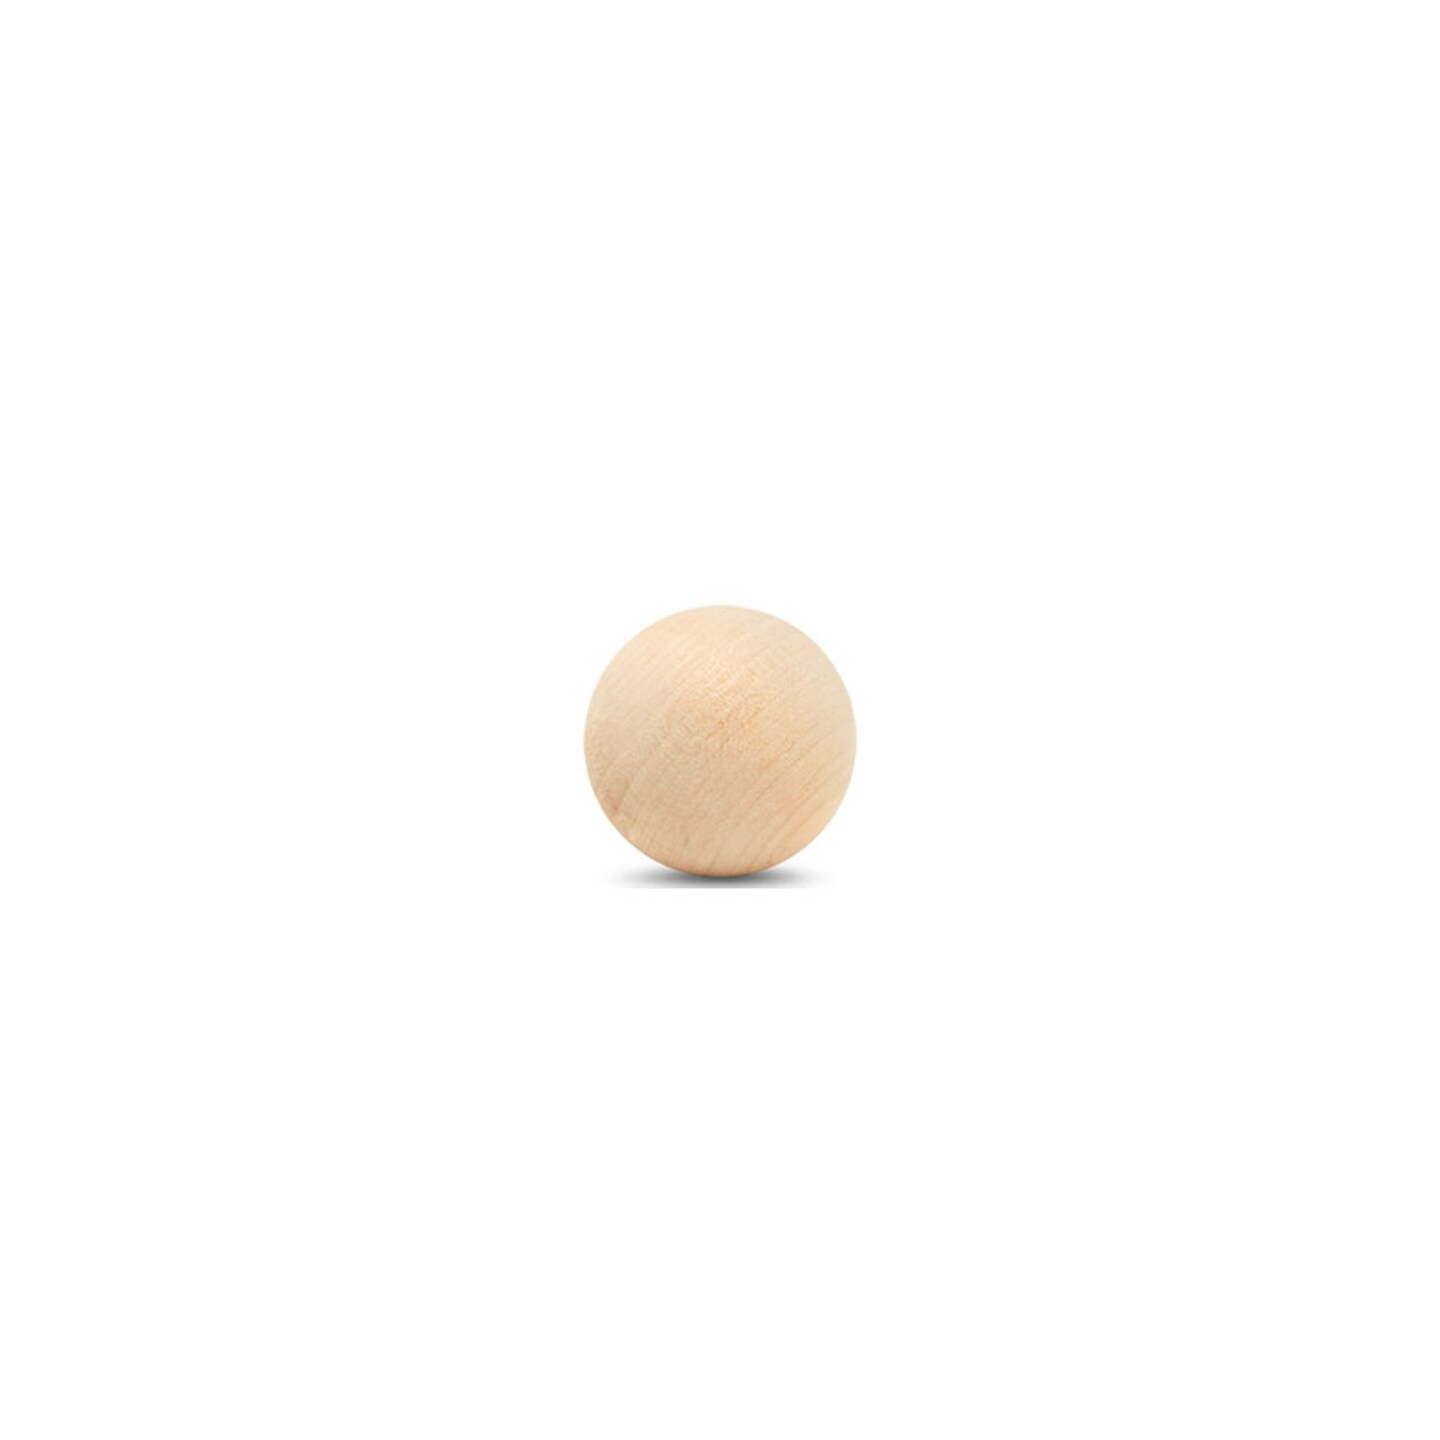 5/8 Inch Small Wood Balls, Pack of 25 Wooden Balls for Crafts and DIY  Project, Hardwood Birch Wood Balls, by Woodpeckers 